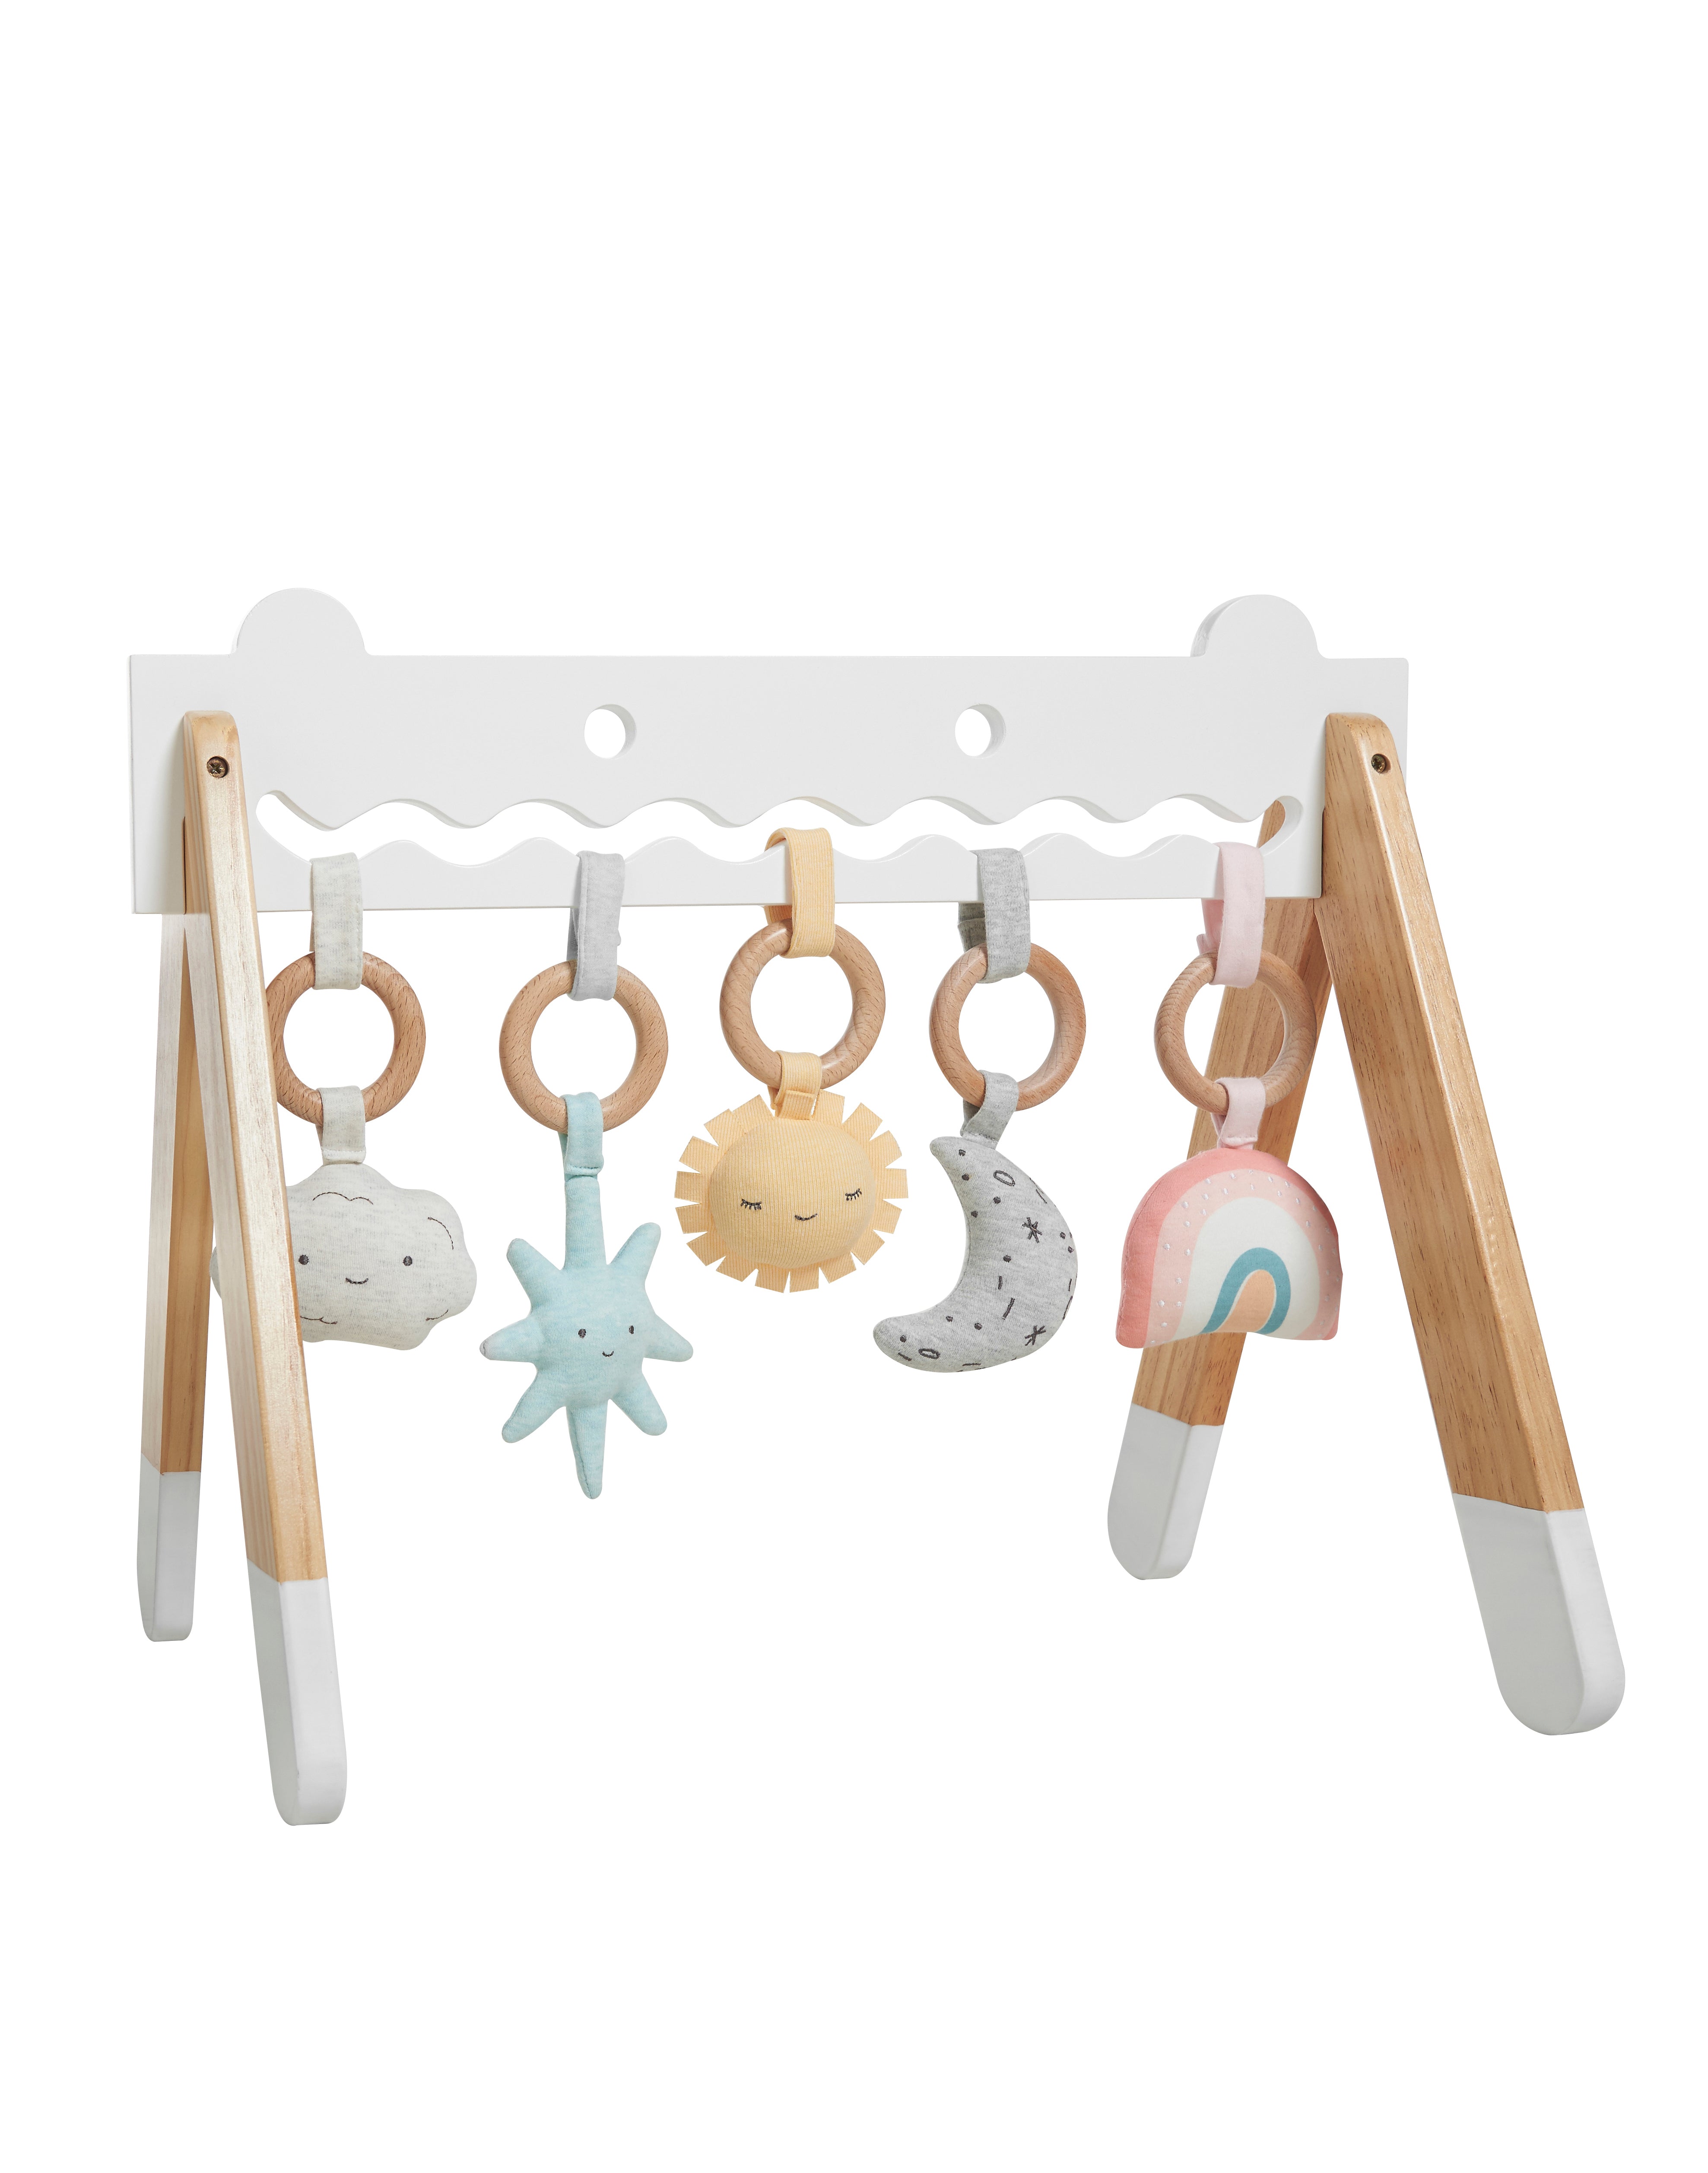 Haus Projekt Wooden Activity Baby Gym with 5 Wood & Plush Toys